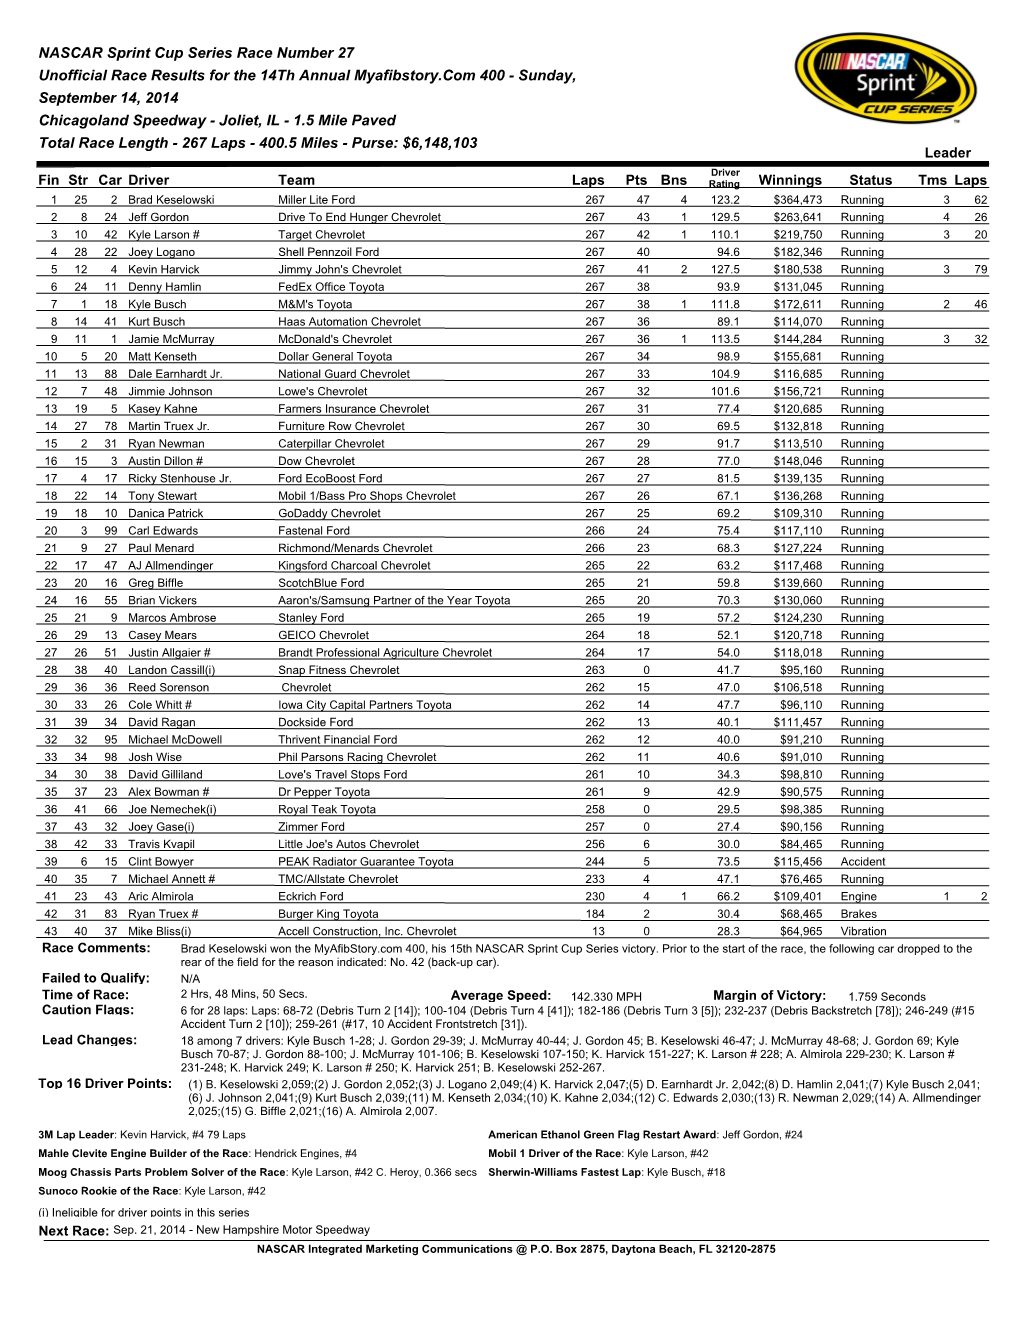 NASCAR Sprint Cup Series Race Number 27 Unofficial Race Results